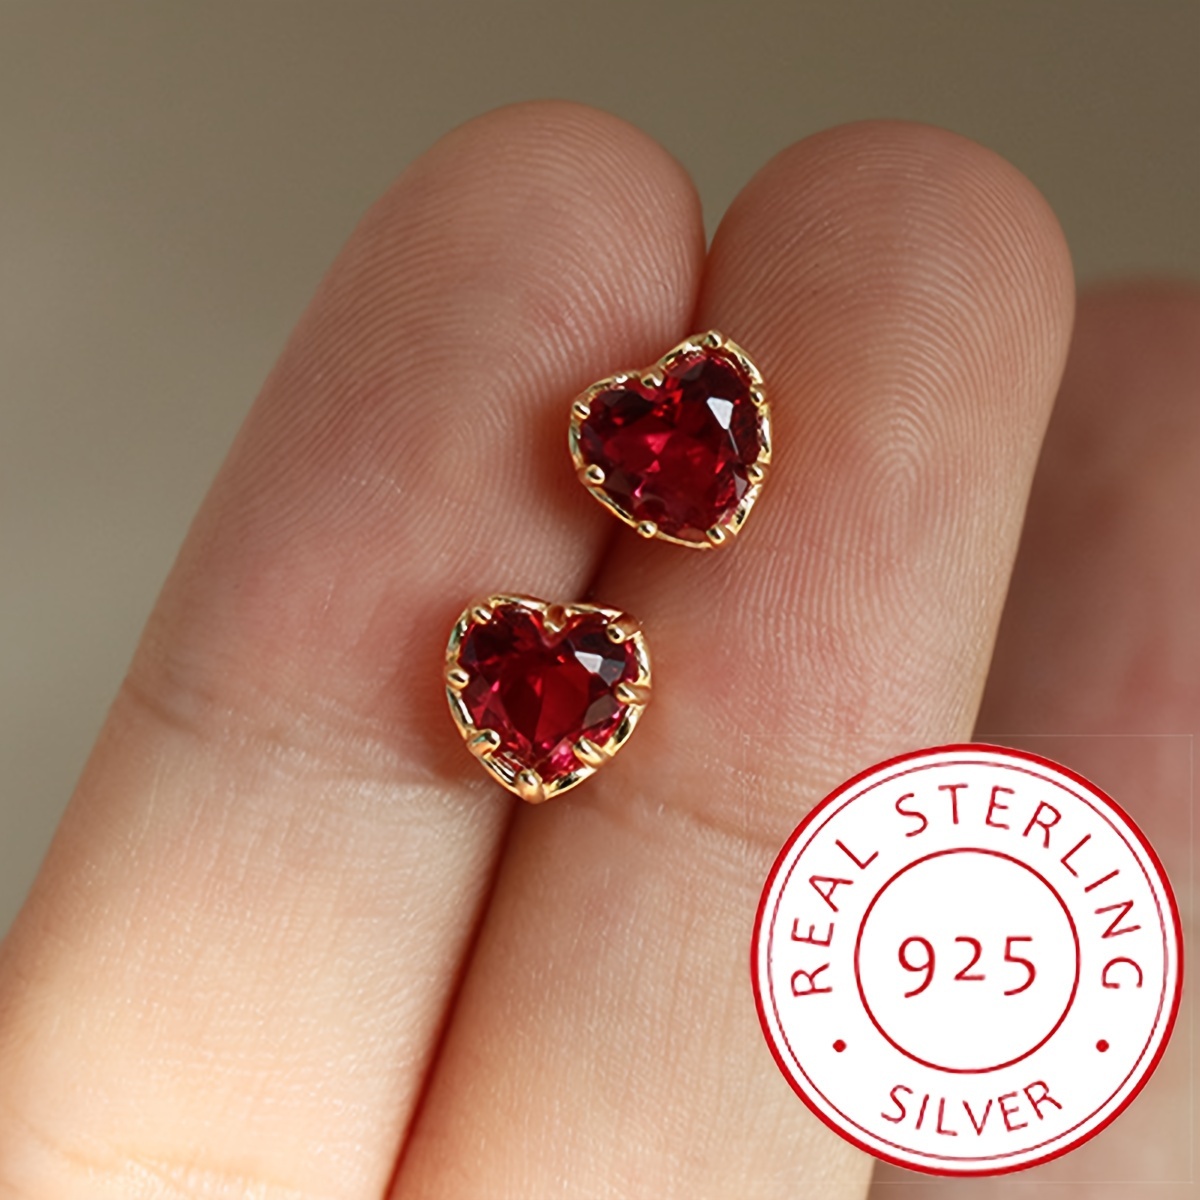 

1.9g/ 0.07oz S925 Sterling Silver Stud Earrings 14k Plated Love Heart Shaped Red Gemstone Stud Earrings Women's Jewelry Accessories For Daily And Party Wearing